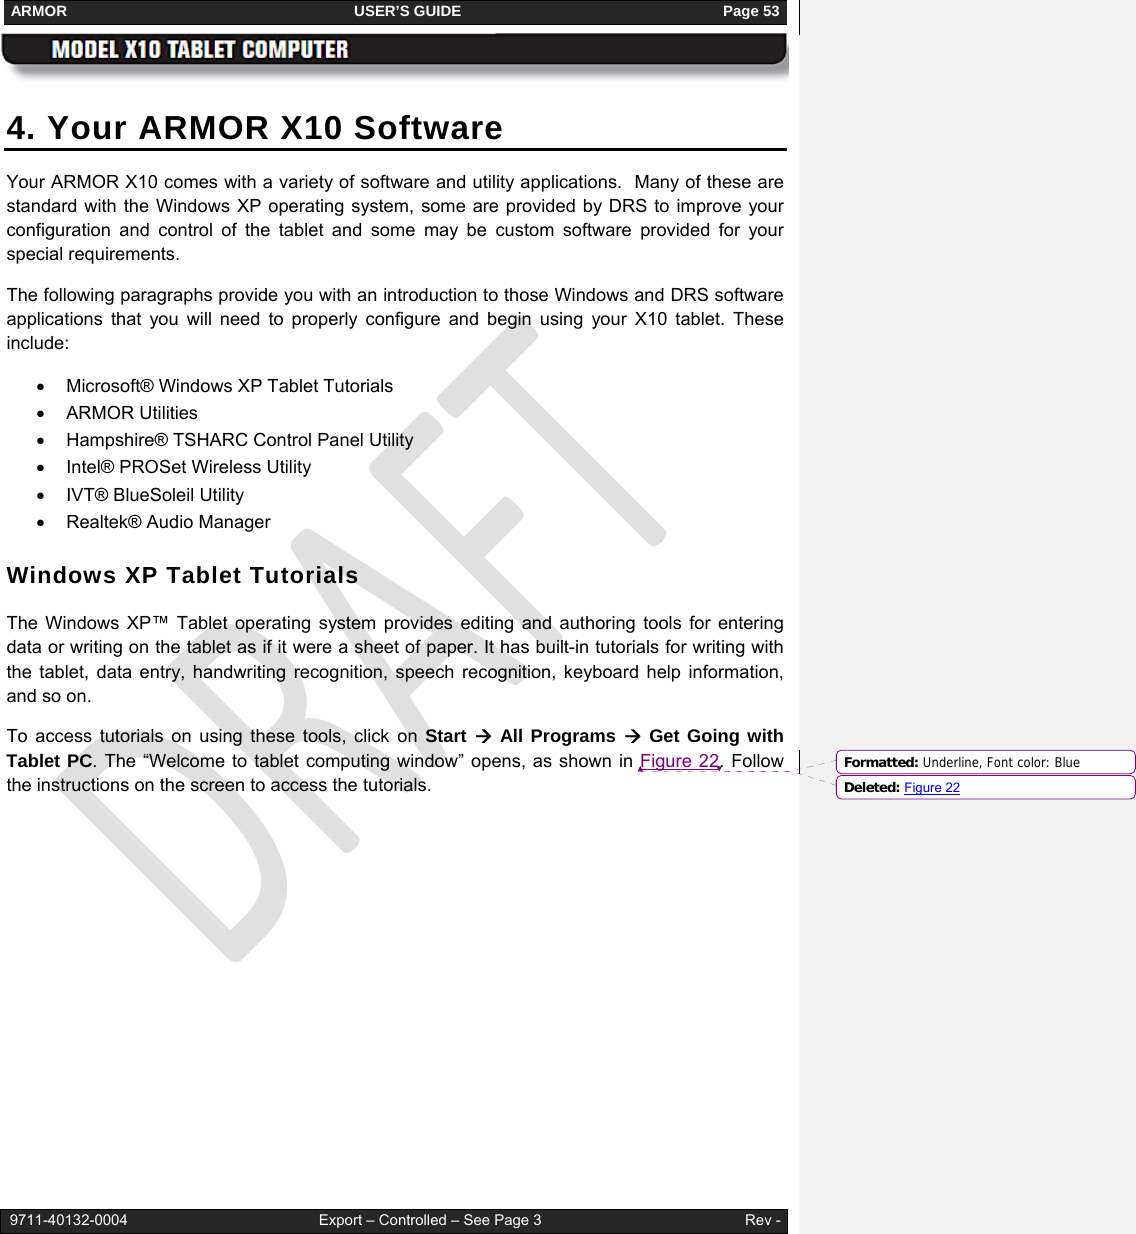 ARMOR                                                                     USER’S GUIDE                                                               Page 53   9711-40132-0004                                              Export – Controlled – See Page 3                                                 Rev - 4. Your ARMOR X10 Software Your ARMOR X10 comes with a variety of software and utility applications.  Many of these are standard with the Windows XP operating system, some are provided by DRS to improve your configuration and control of the tablet and some may be custom software provided for your special requirements.  The following paragraphs provide you with an introduction to those Windows and DRS software applications that you will need to properly configure and begin using your X10 tablet. These include: •  Microsoft® Windows XP Tablet Tutorials • ARMOR Utilities •  Hampshire® TSHARC Control Panel Utility •  Intel® PROSet Wireless Utility •  IVT® BlueSoleil Utility •  Realtek® Audio Manager Windows XP Tablet Tutorials The Windows XP™ Tablet operating system provides editing and authoring tools for entering data or writing on the tablet as if it were a sheet of paper. It has built-in tutorials for writing with the tablet, data entry, handwriting recognition, speech recognition, keyboard help information, and so on.  To access tutorials on using these tools, click on Start Æ All Programs Æ Get Going with Tablet PC. The “Welcome to tablet computing window” opens, as shown in Figure 22. Follow the instructions on the screen to access the tutorials. Formatted: Underline, Font color: BlueDeleted: Figure 22